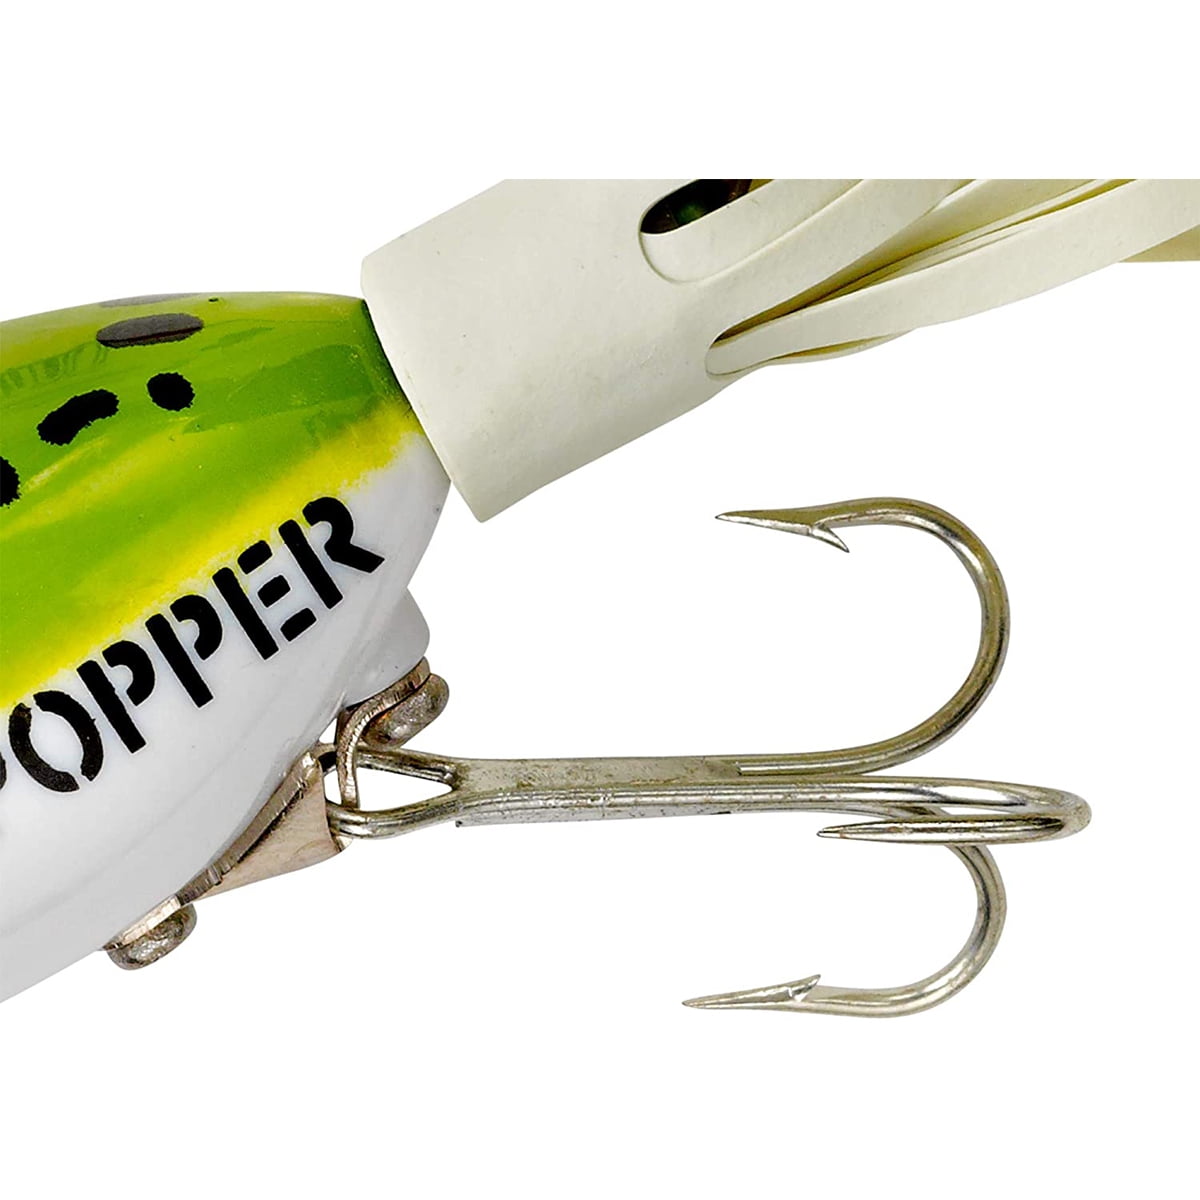 Arbogast Hula Popper 5/8 oz Fishing Lure - White/Red Head